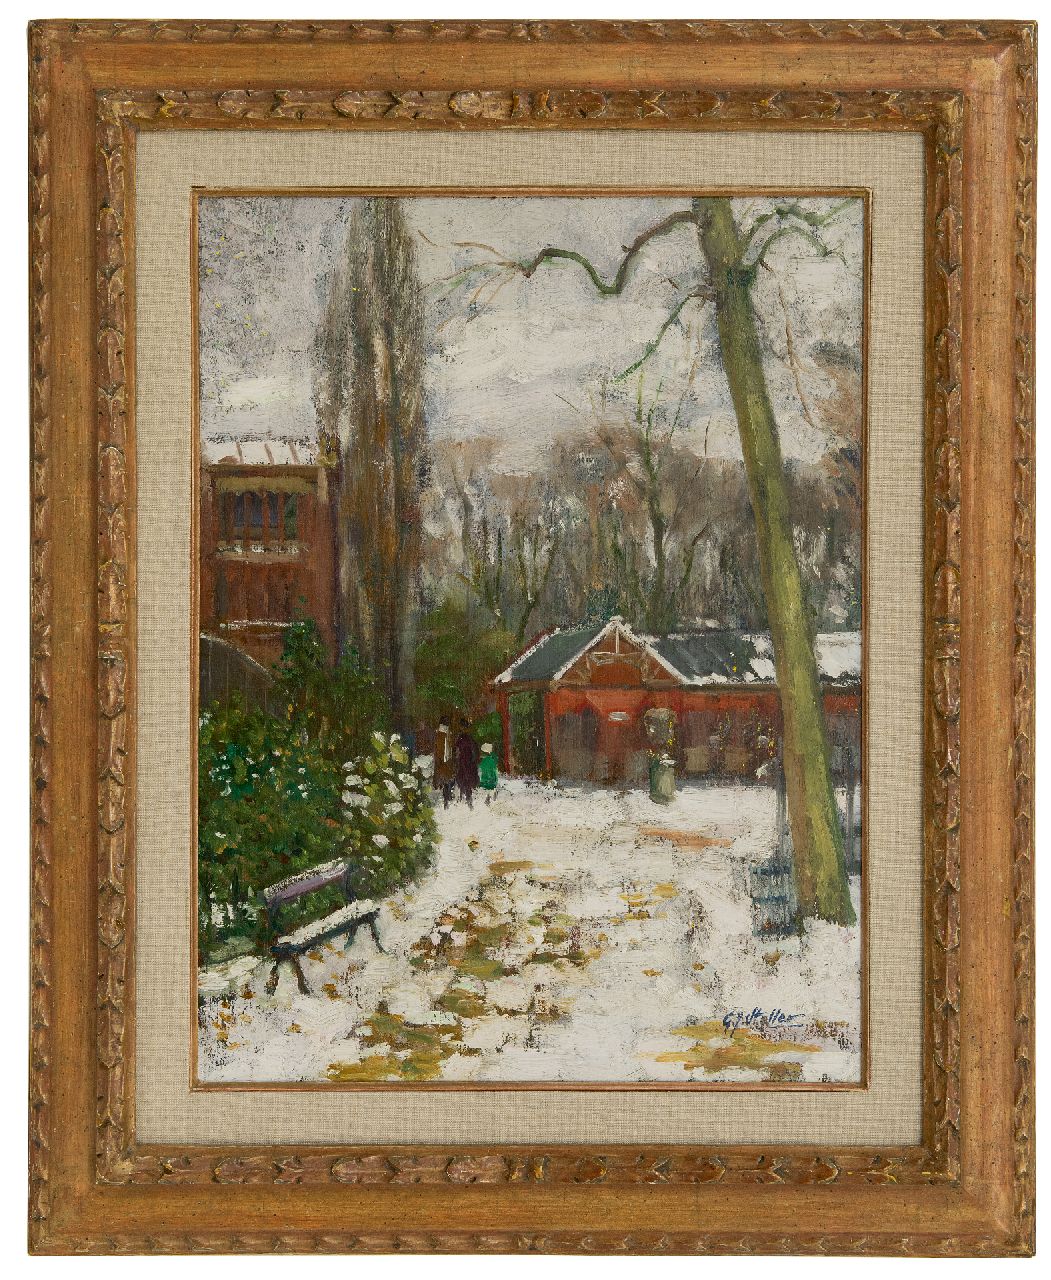 Staller G.J.  | Gerard Johan Staller, Artis in wintertime, oil on canvas 53.3 x 41.3 cm, signed l.r. and painted ca. 1910